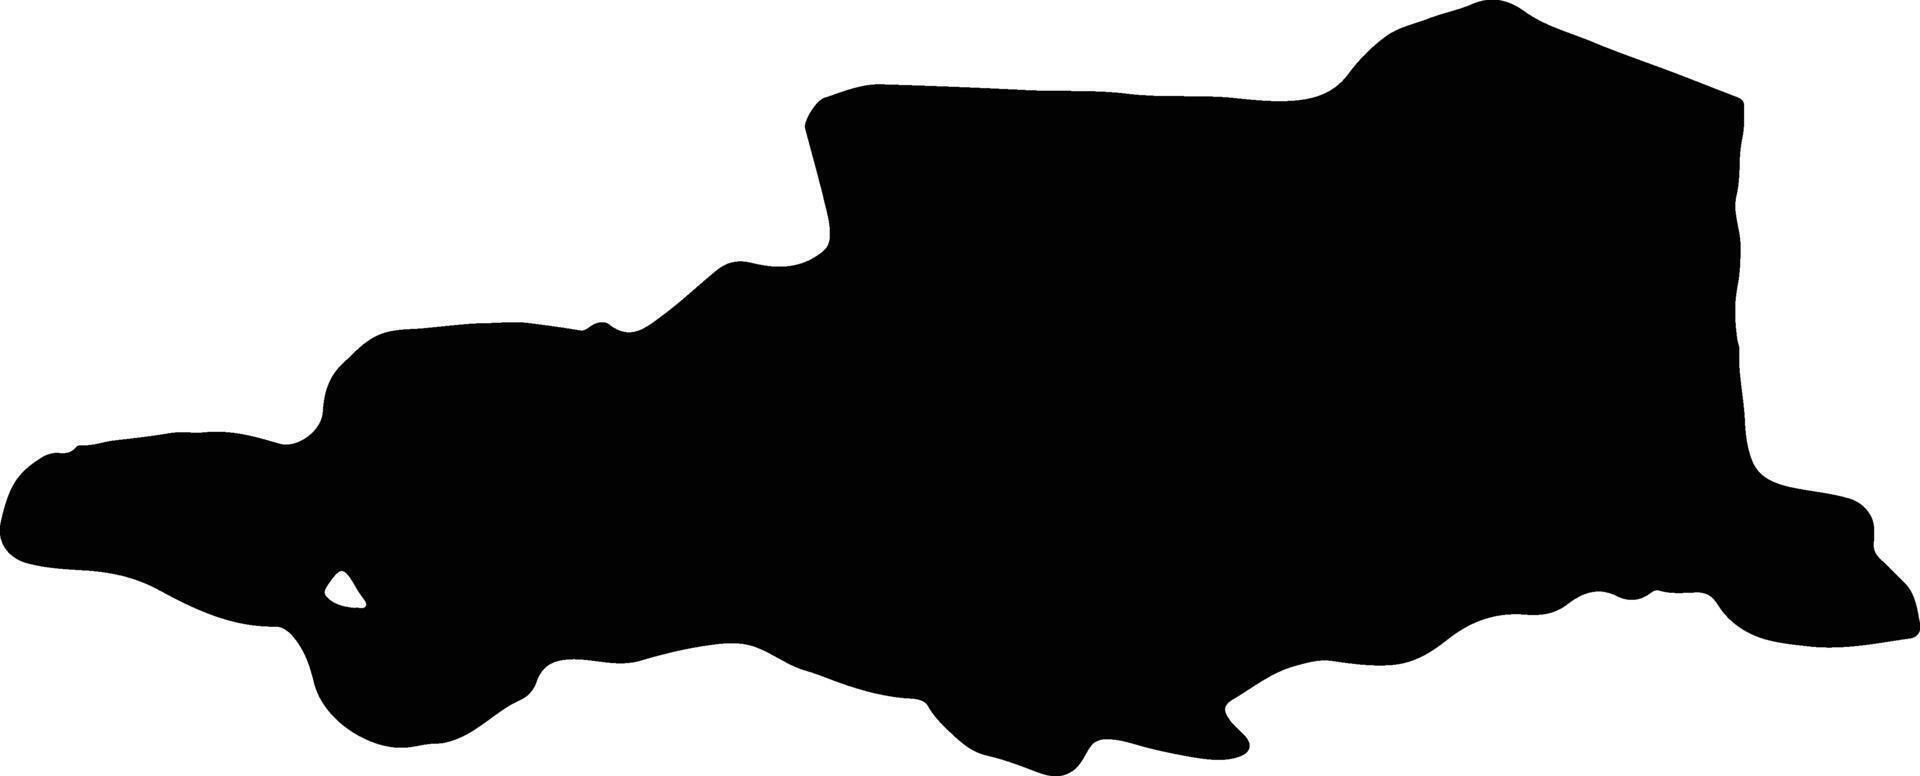 Pyrenees-Orientales France silhouette map vector